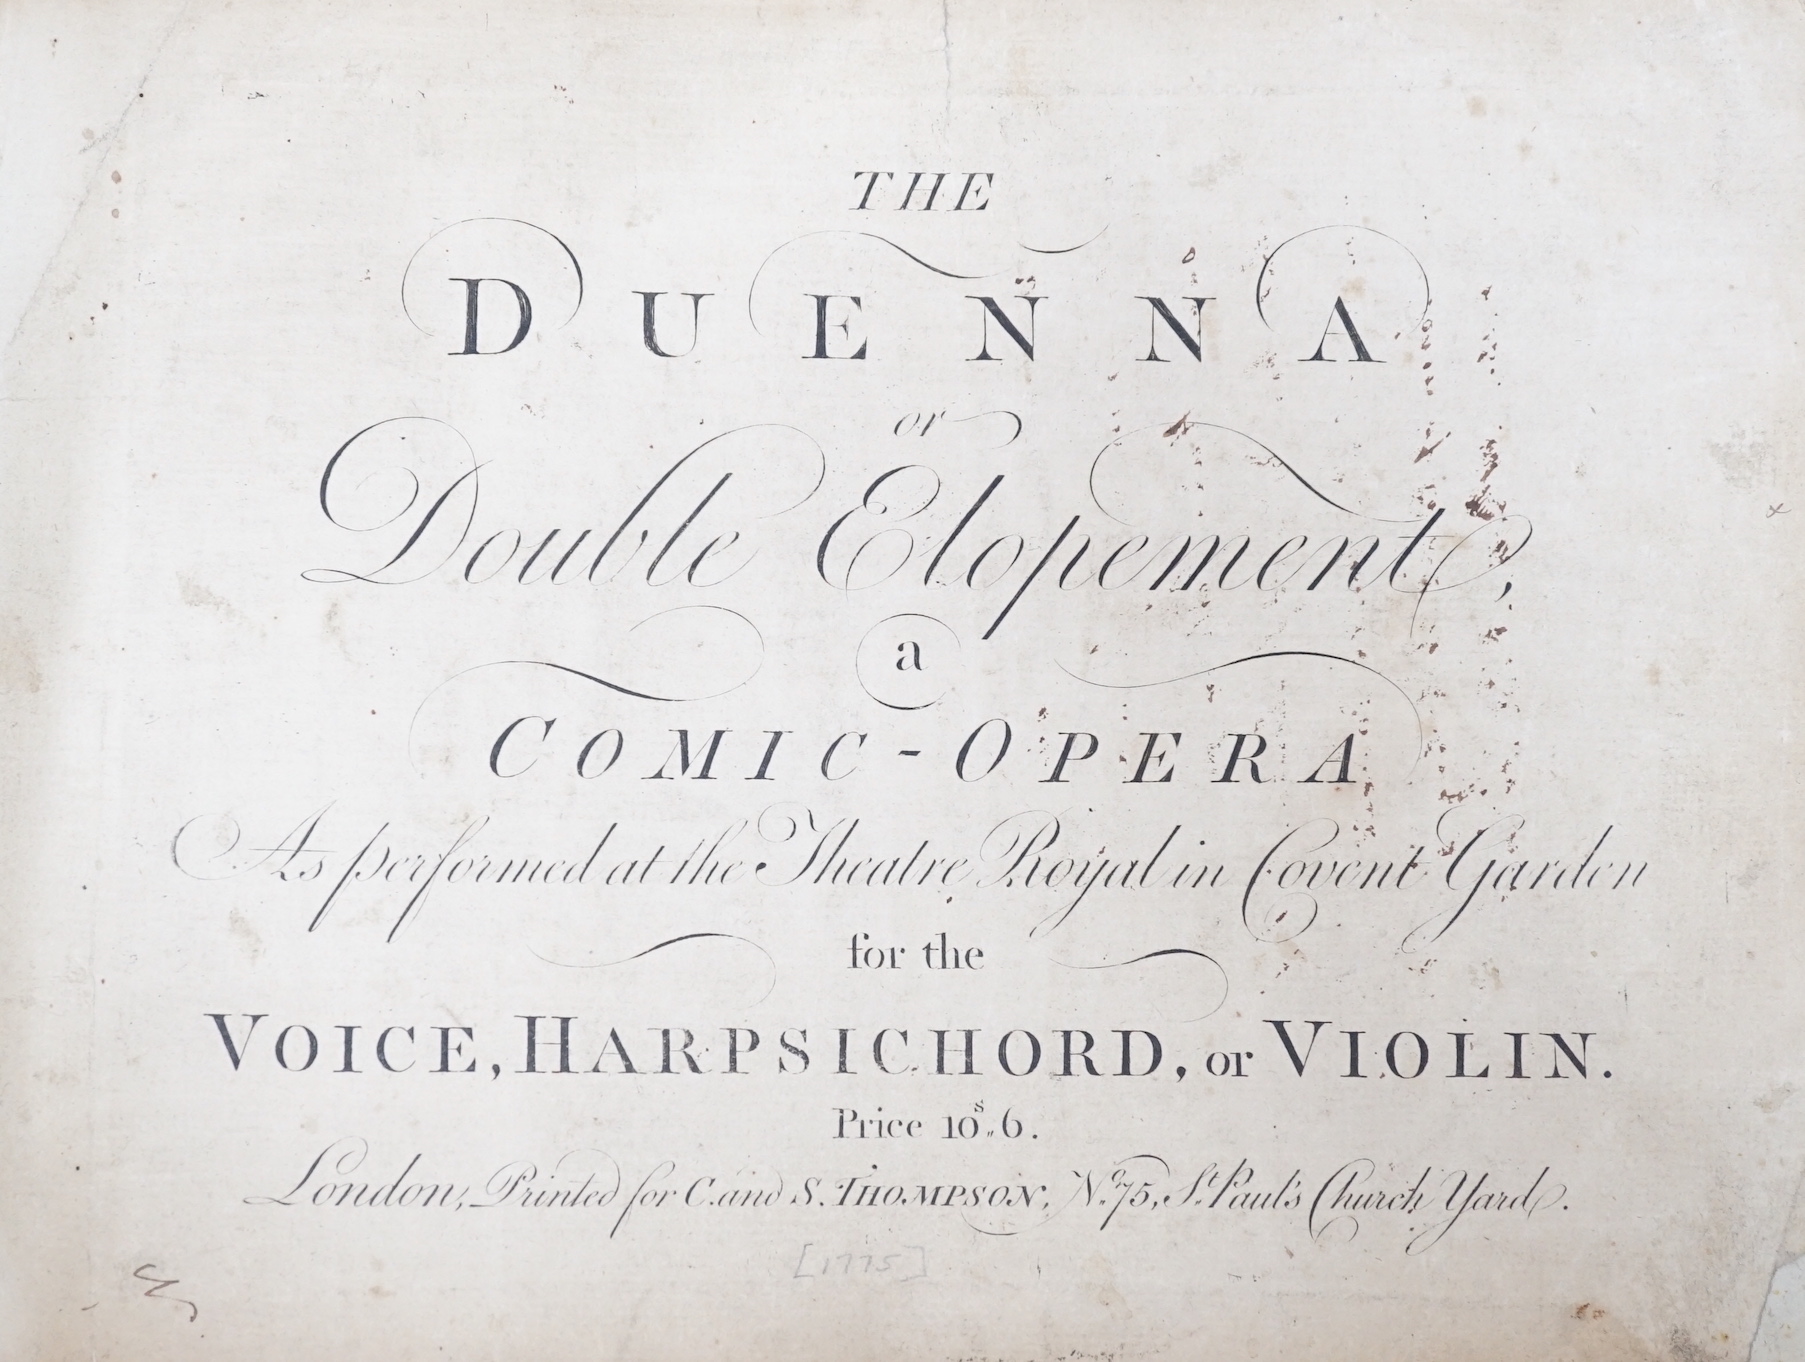 Book: Sheridan Duenna , a comic opera for the voice, Harpsichord and violin                                                                                                                                                 